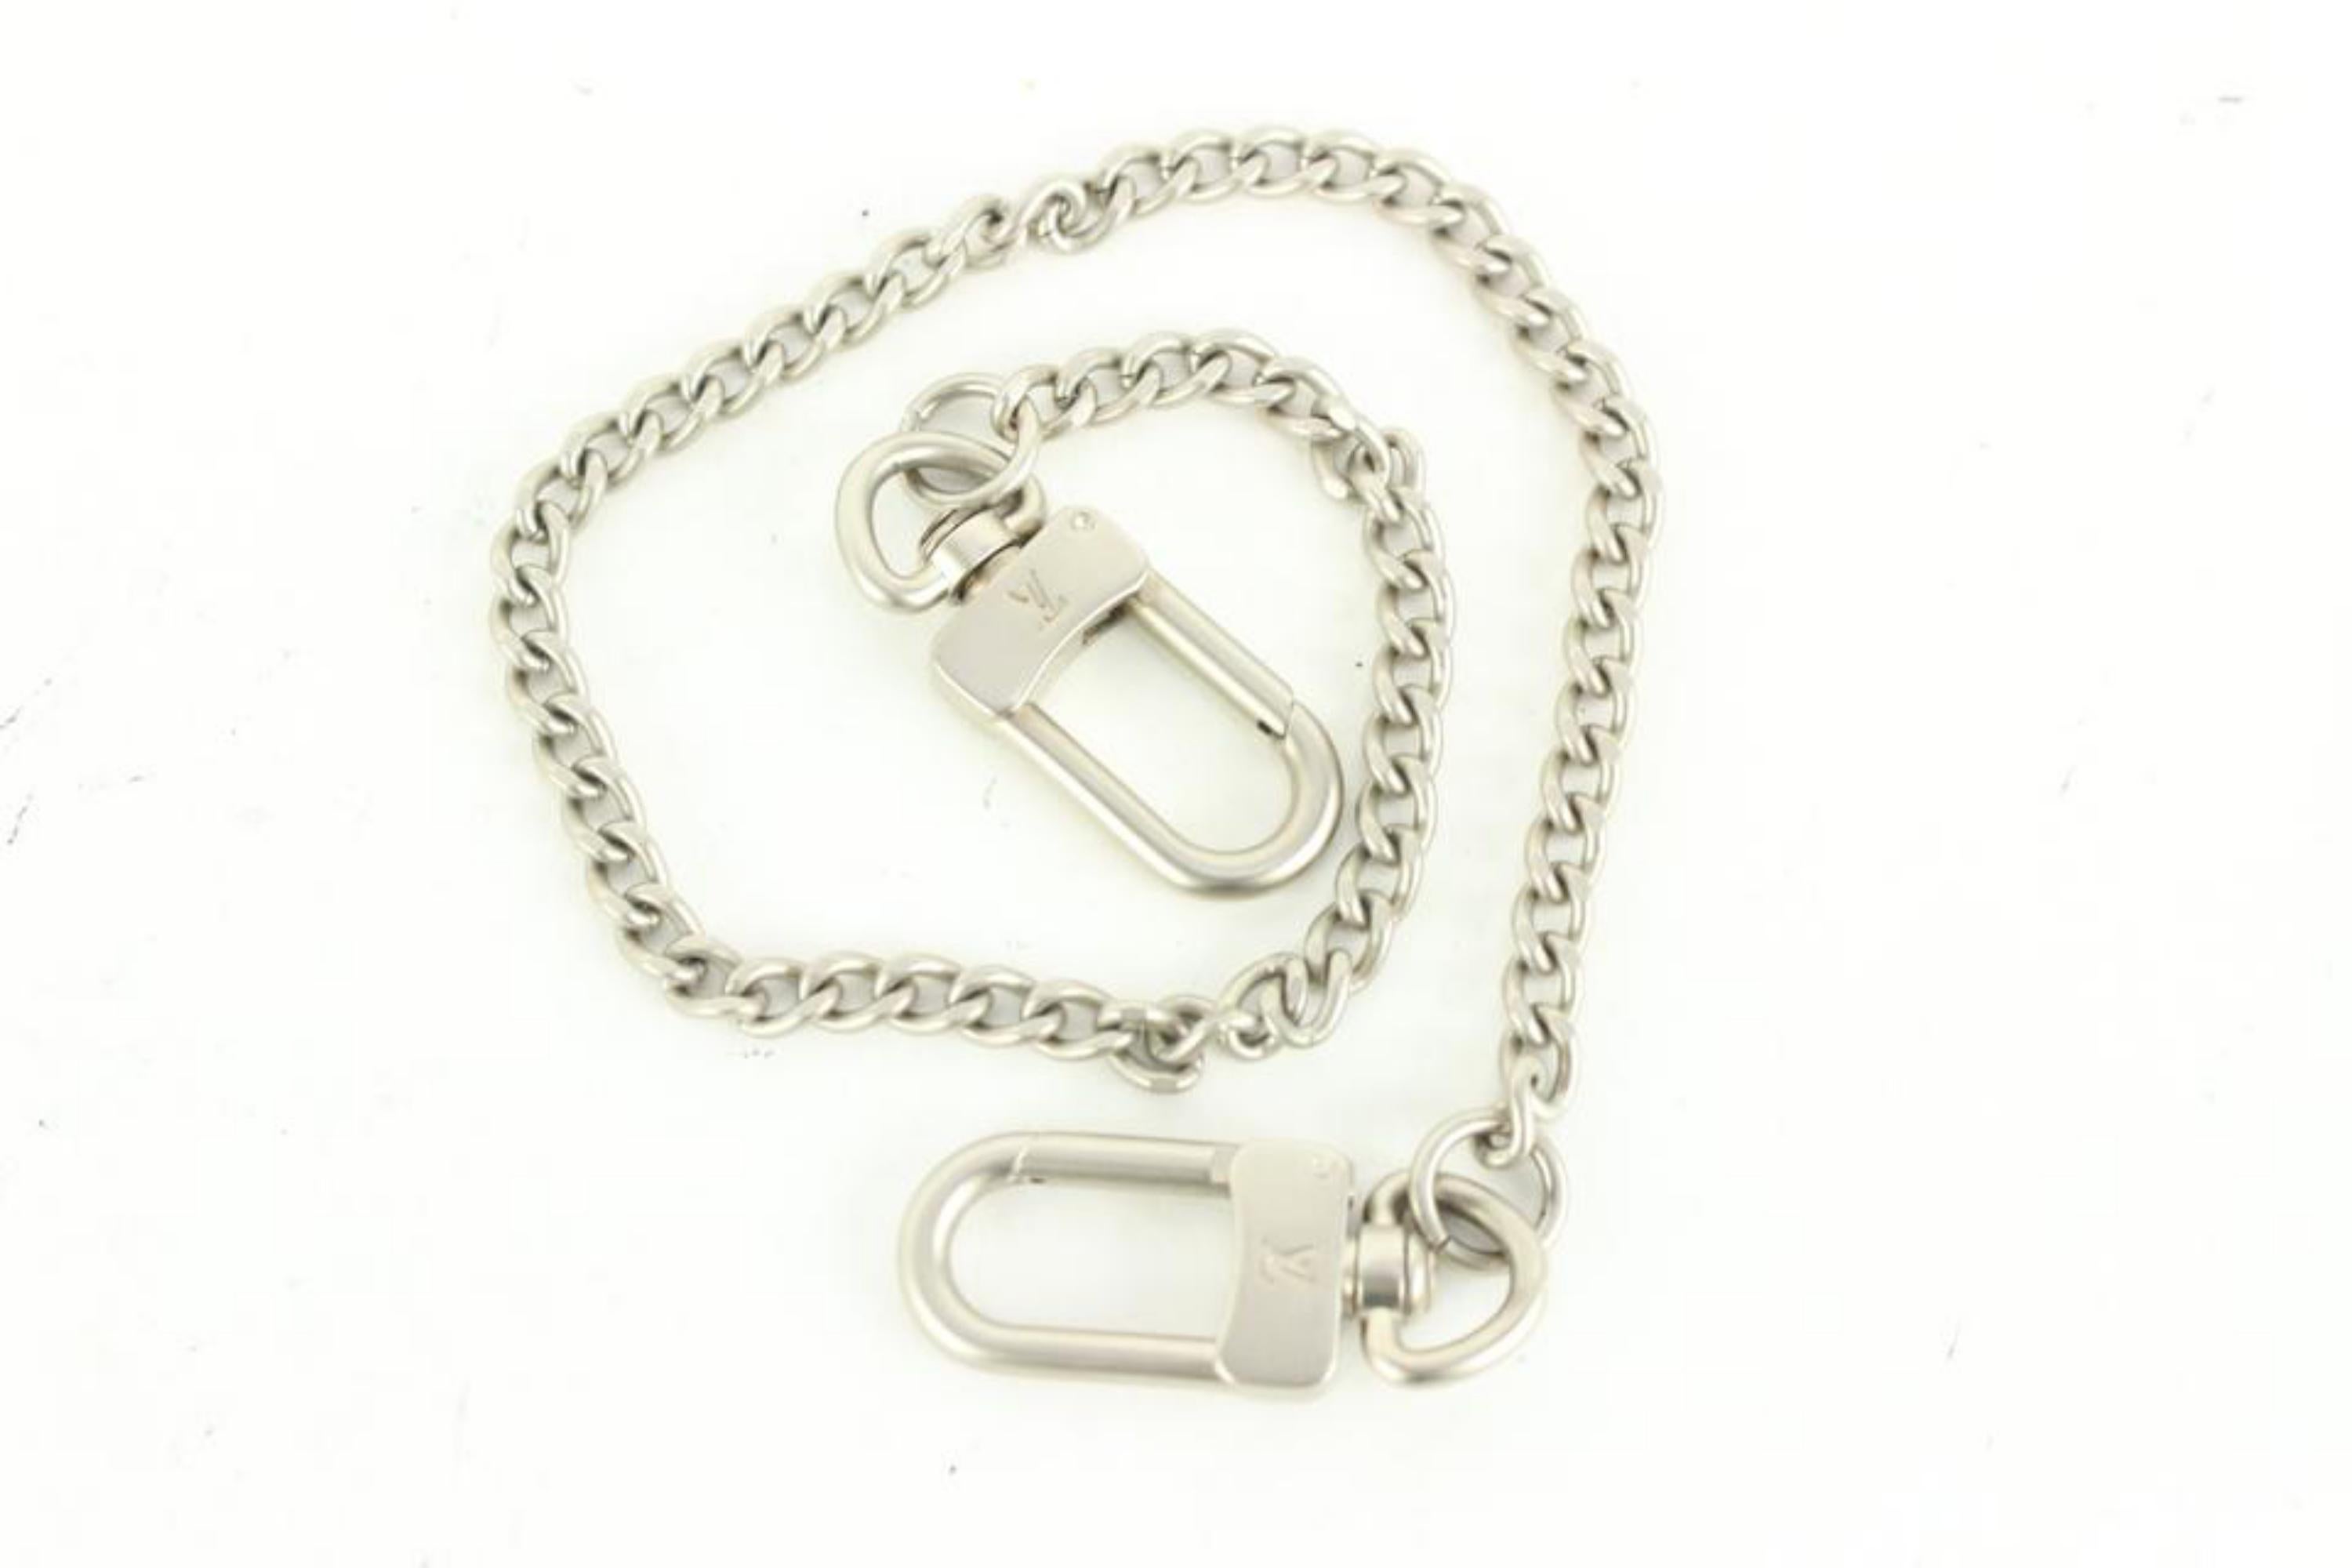 Louis Vuitton Chain Strap Extender - For Sale on 1stDibs  louis vuitton  strap extender, louis vuitton bag extender, louis vuitton pochette extender